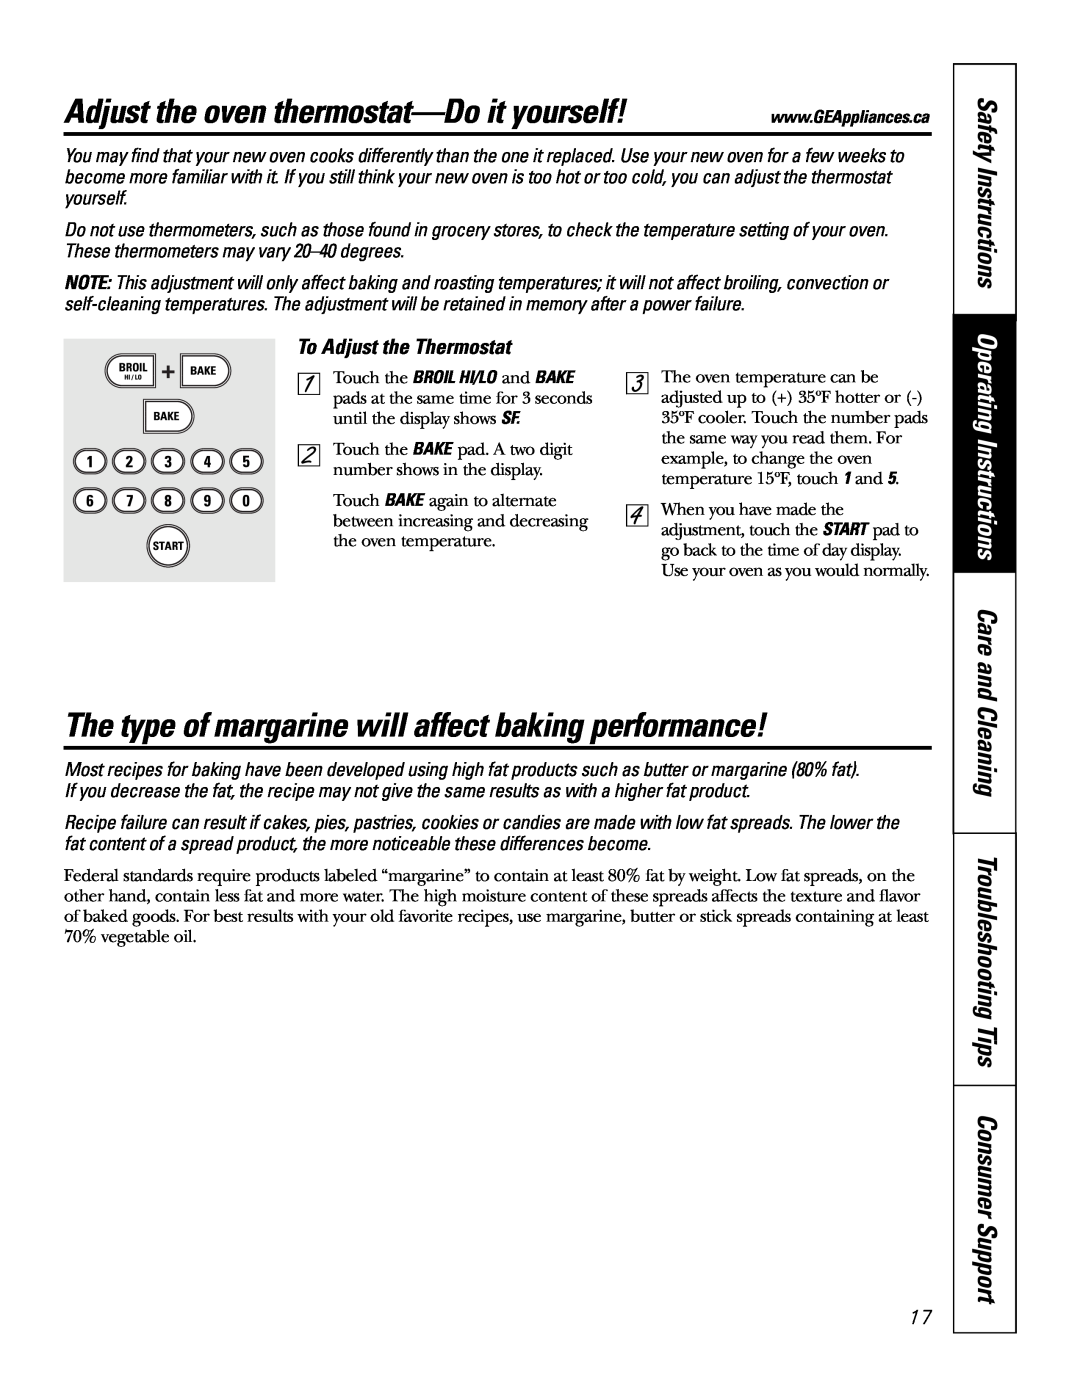 GE JCB905 Adjust the oven thermostat-Doit yourself, Cleaning Troubleshooting Tips Consumer Support, Safety Instructions 